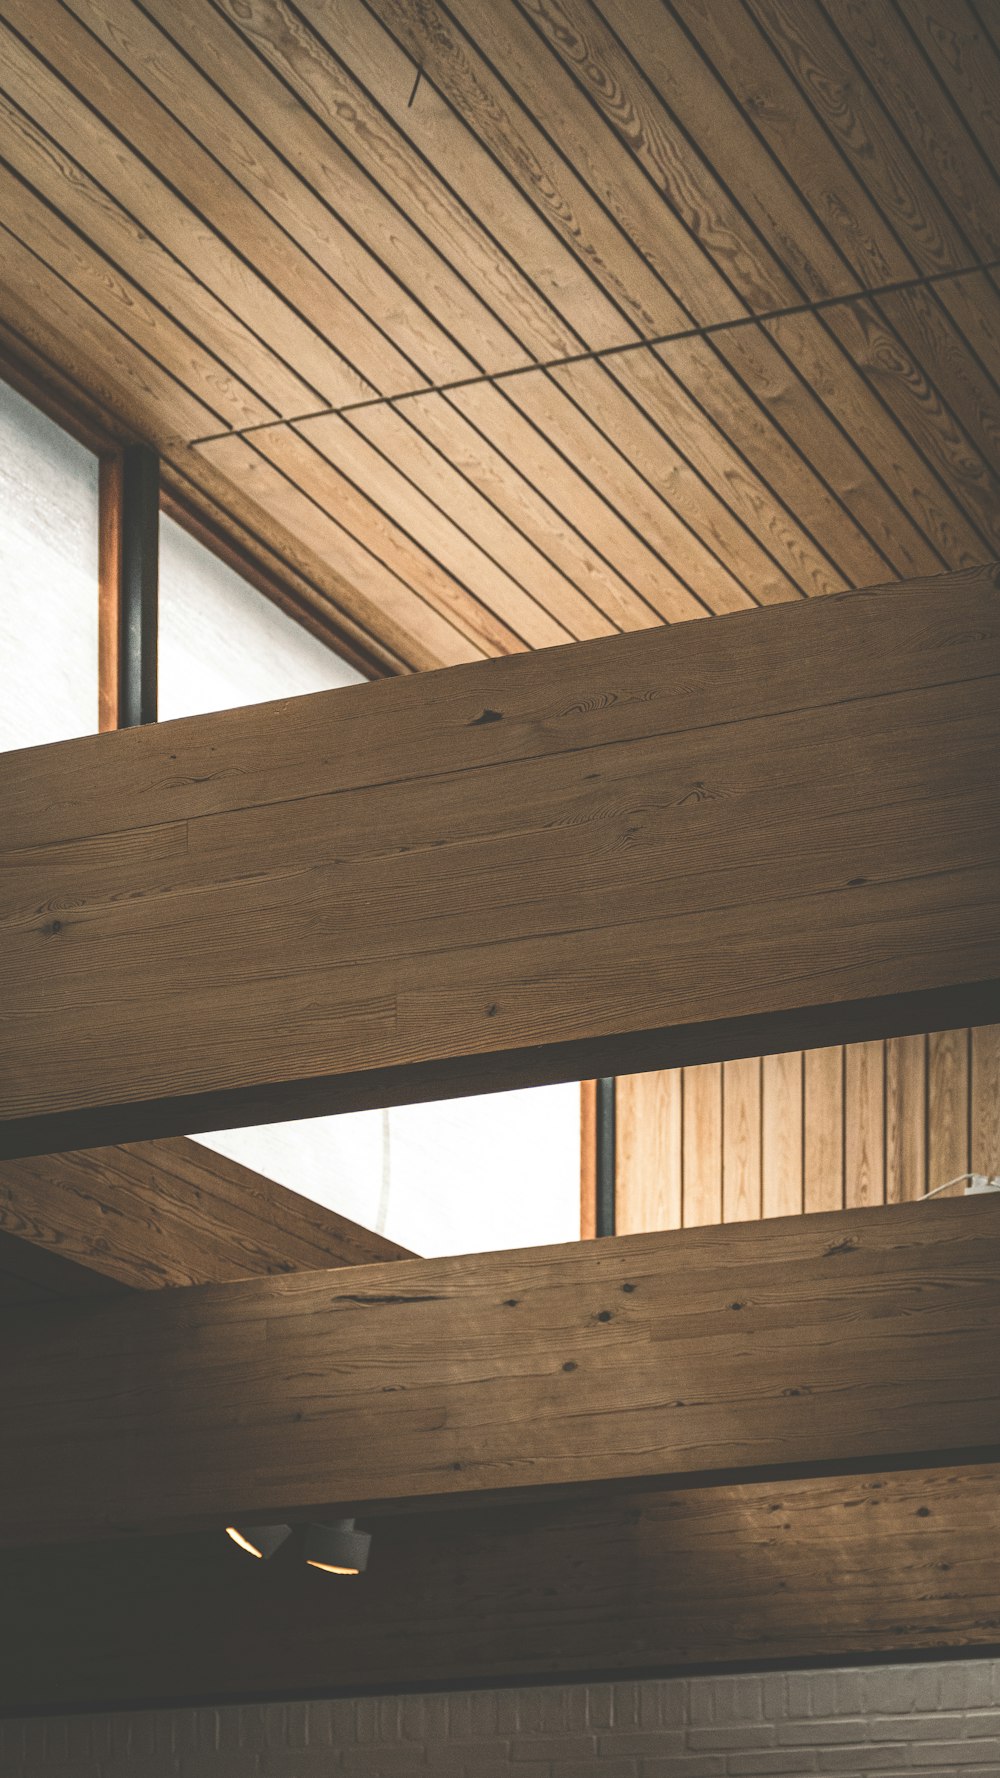 a close up of a wooden ceiling with a skylight